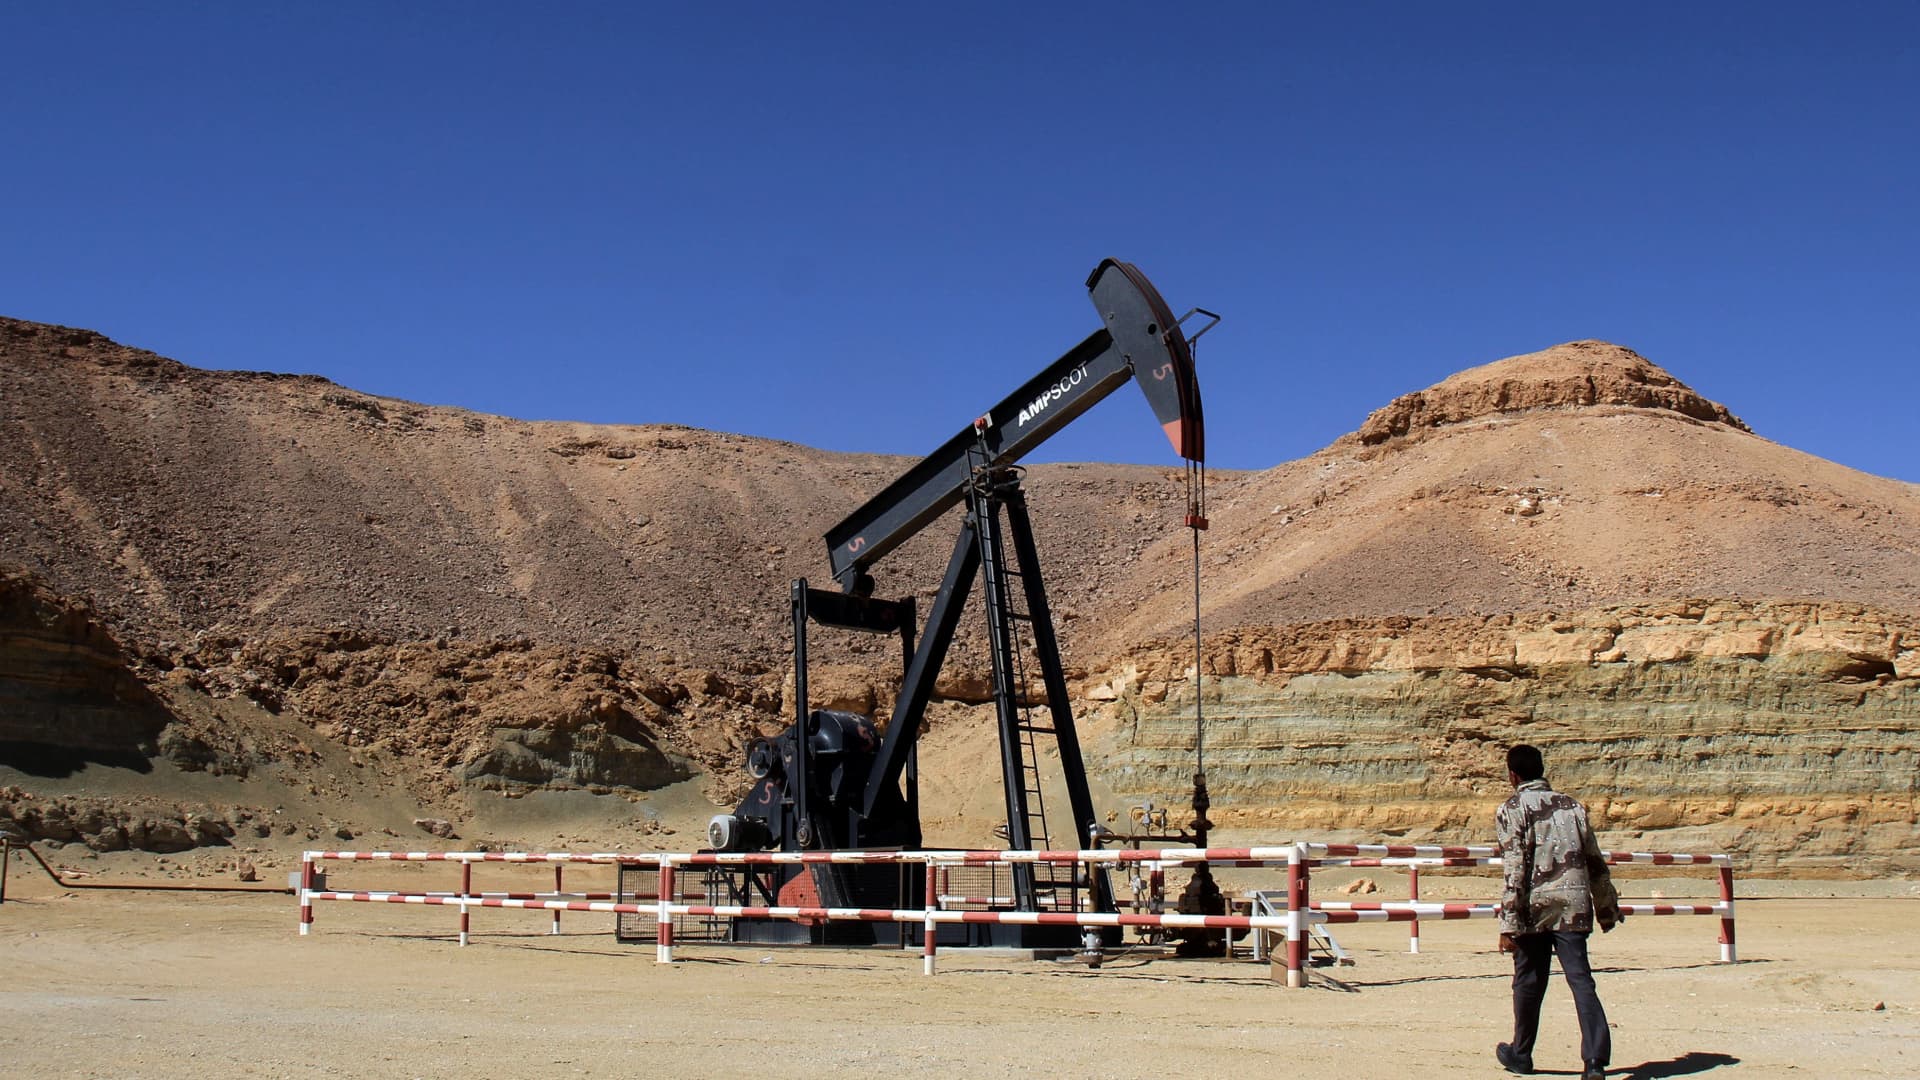 A libyan security member walks by an oil drill on March 23, 2013 at the al-Ghani oil field.